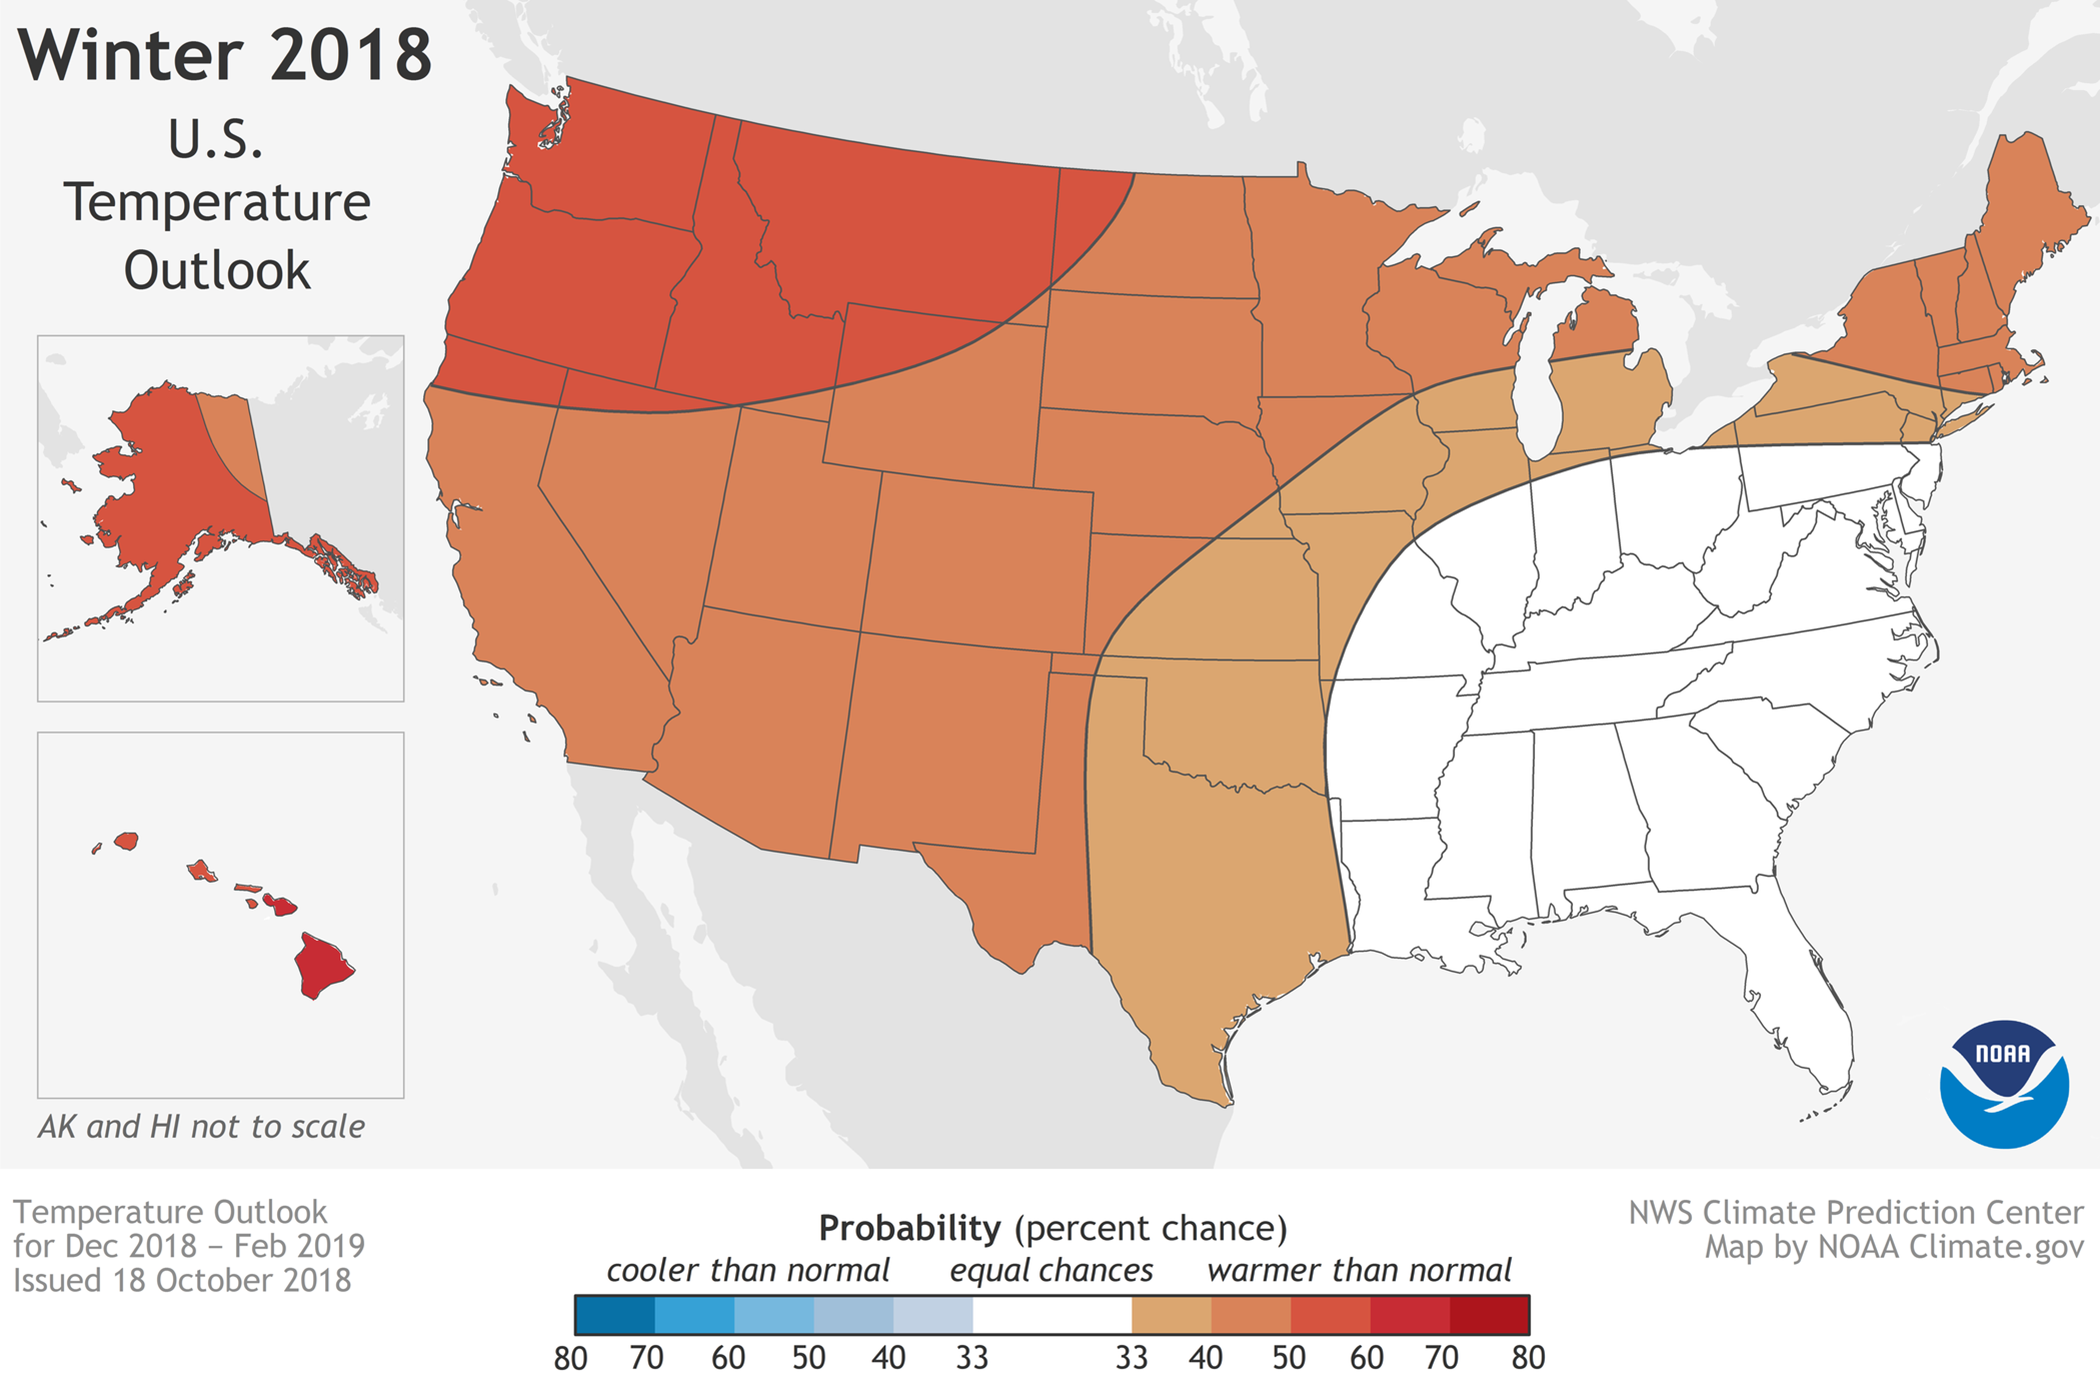 2018-19 Winter Outlook map for temperature.